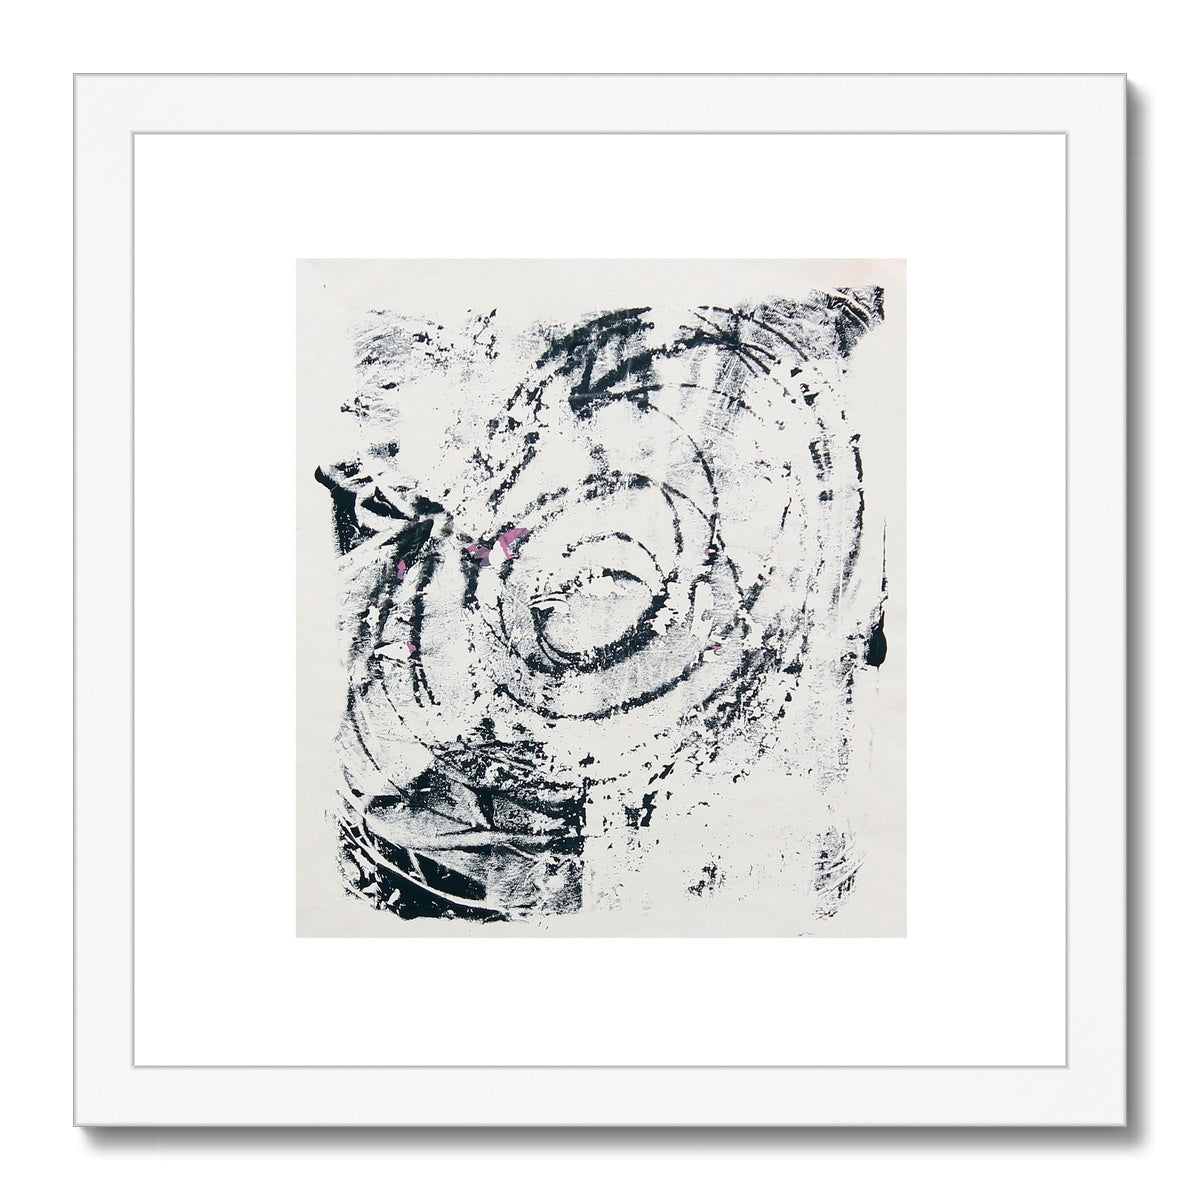 Inhale and exhale 8, Framed & Mounted Print